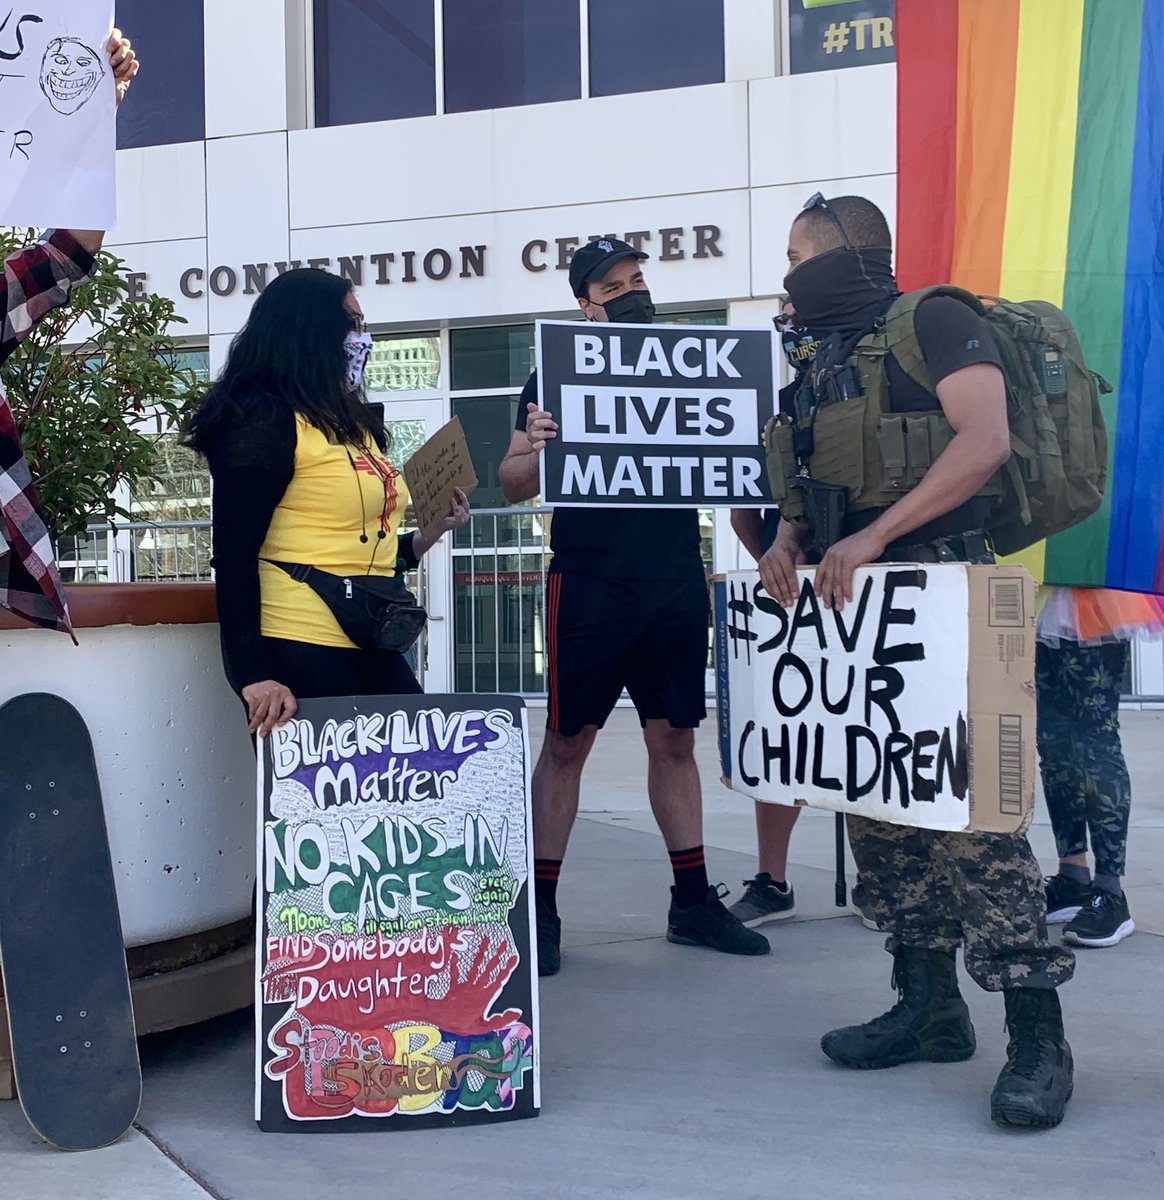 Proud Boys rally is supposed to be starting now but there’s just this one guy. The back of his sign says “all guns matter” and he has three kids with him